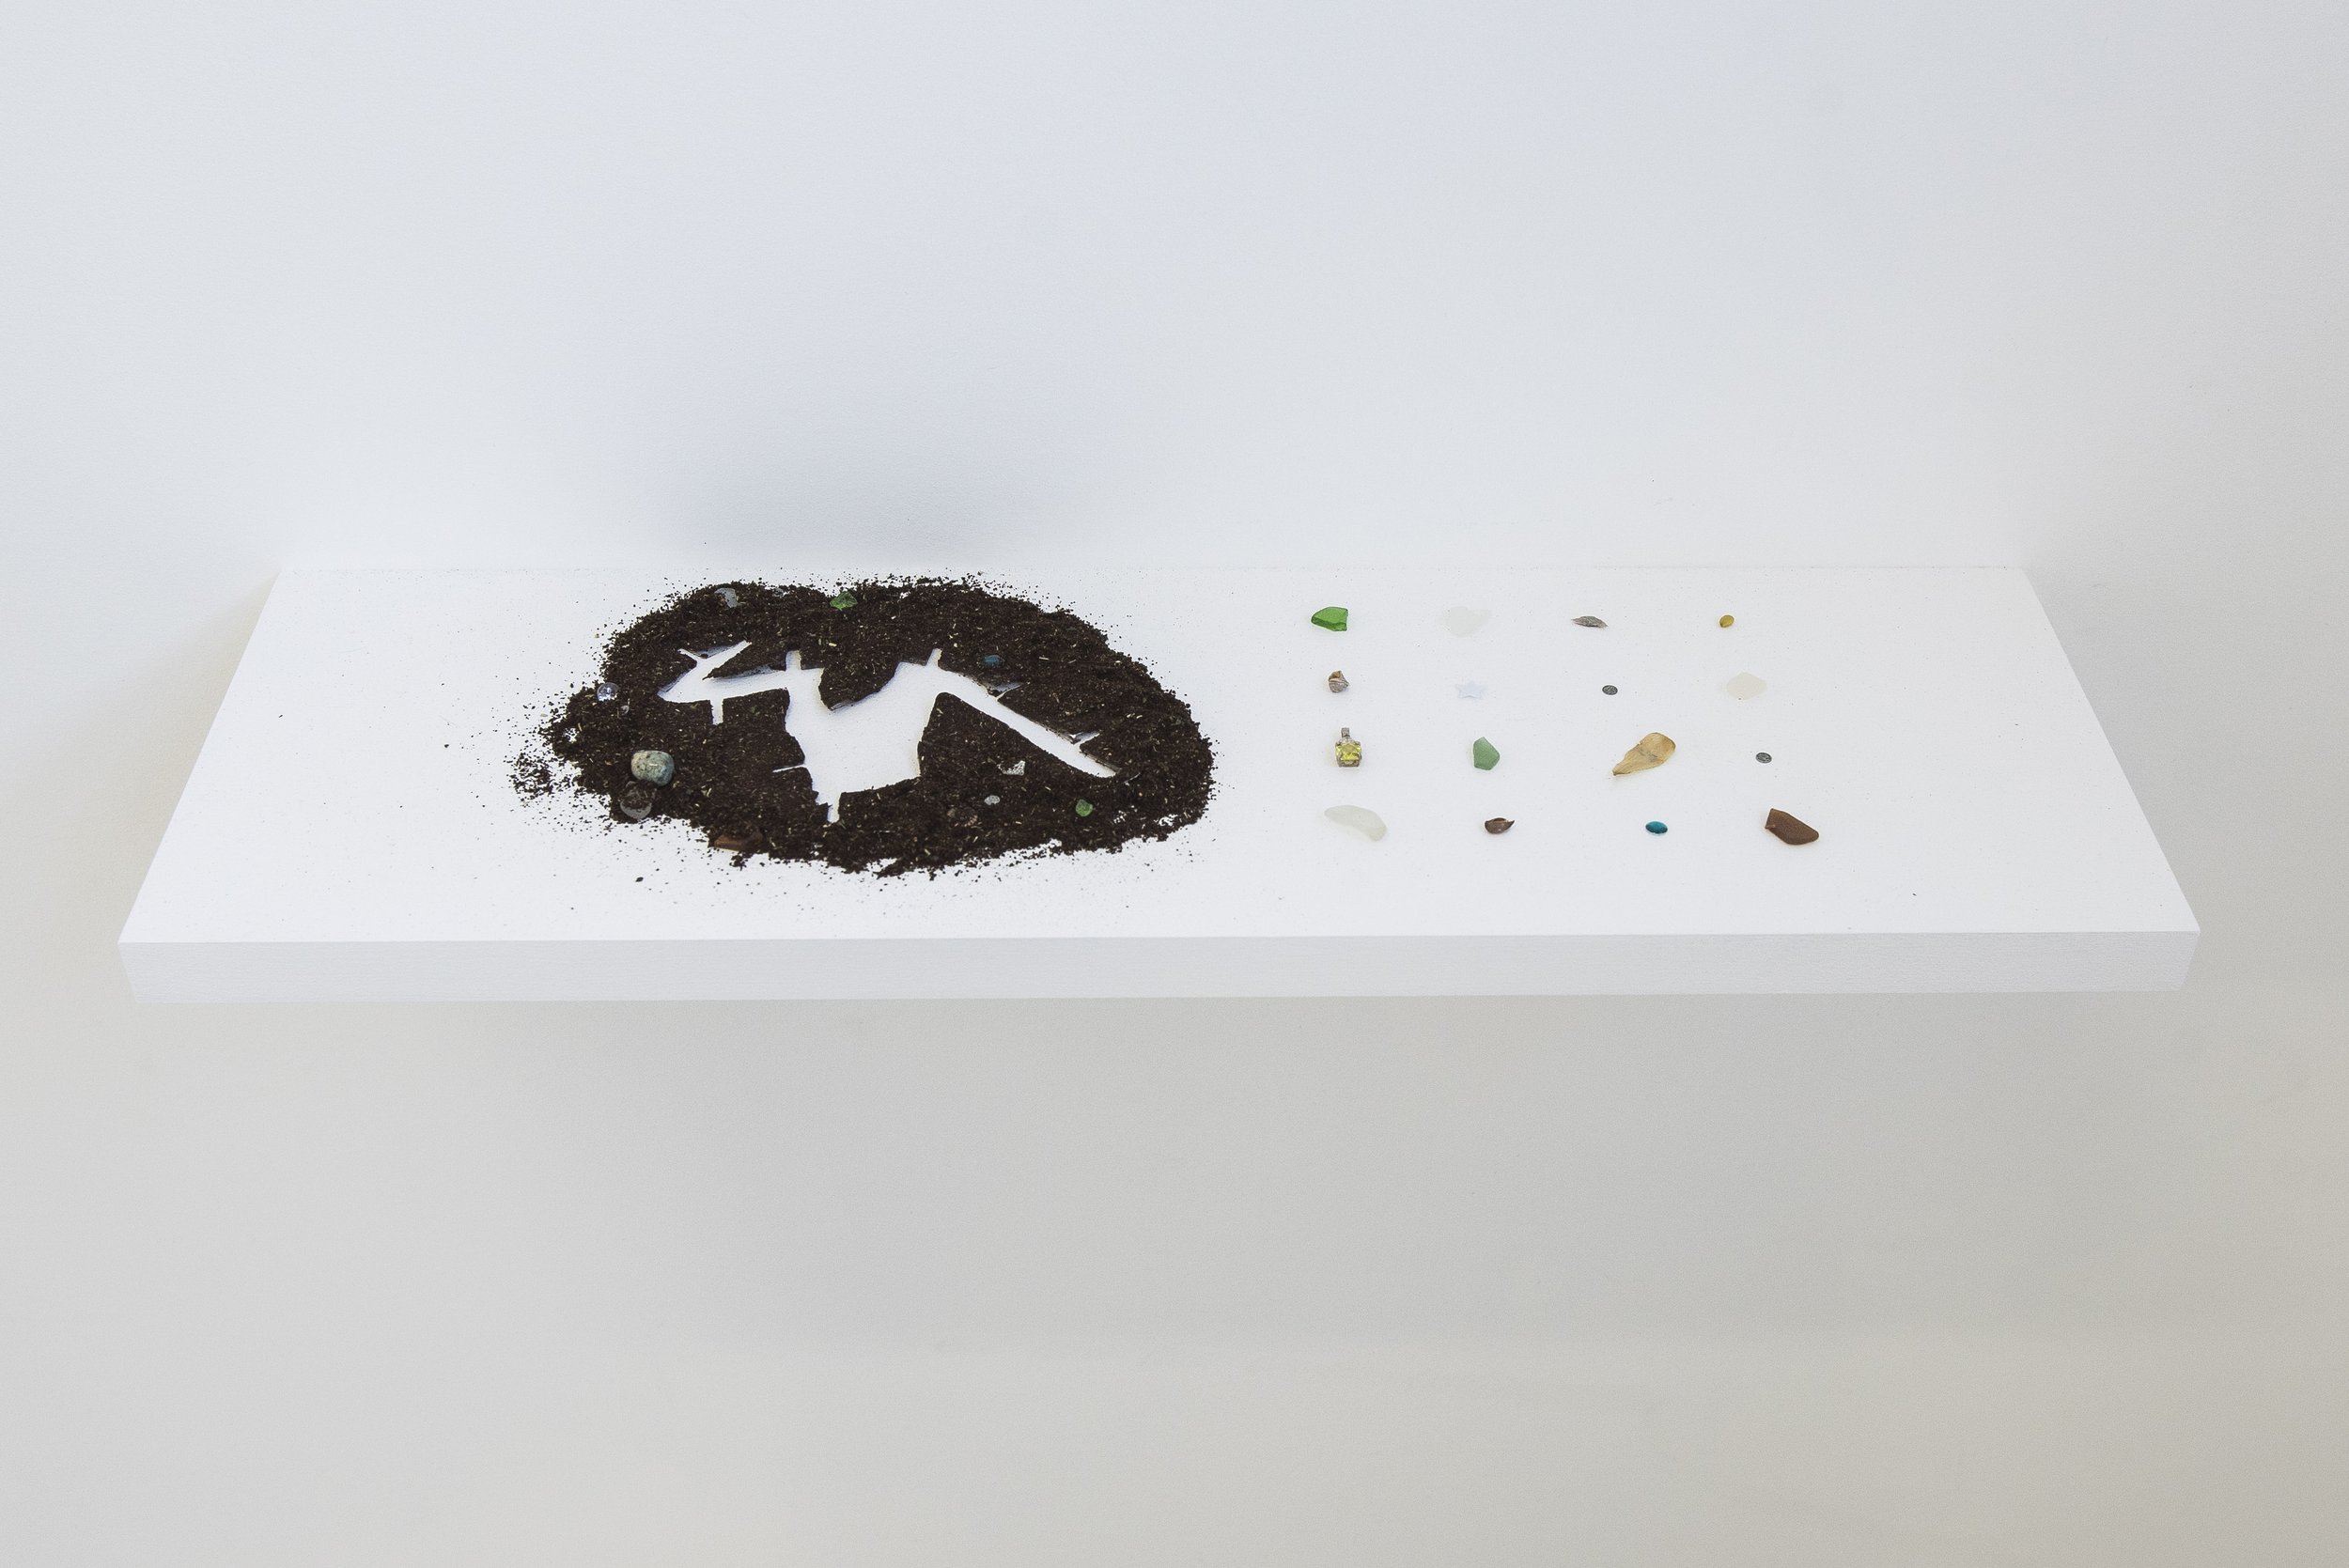   dig site , 2021   McIver’s ‘Goroka Espresso’ coffee grounds, nettle tea, incense ashes, epoxy resin, contact paper, various found objects.   Shelf dimensions: 60 x 24 x 3.8 cm.   Image courtesy of Jordan Halsall. 